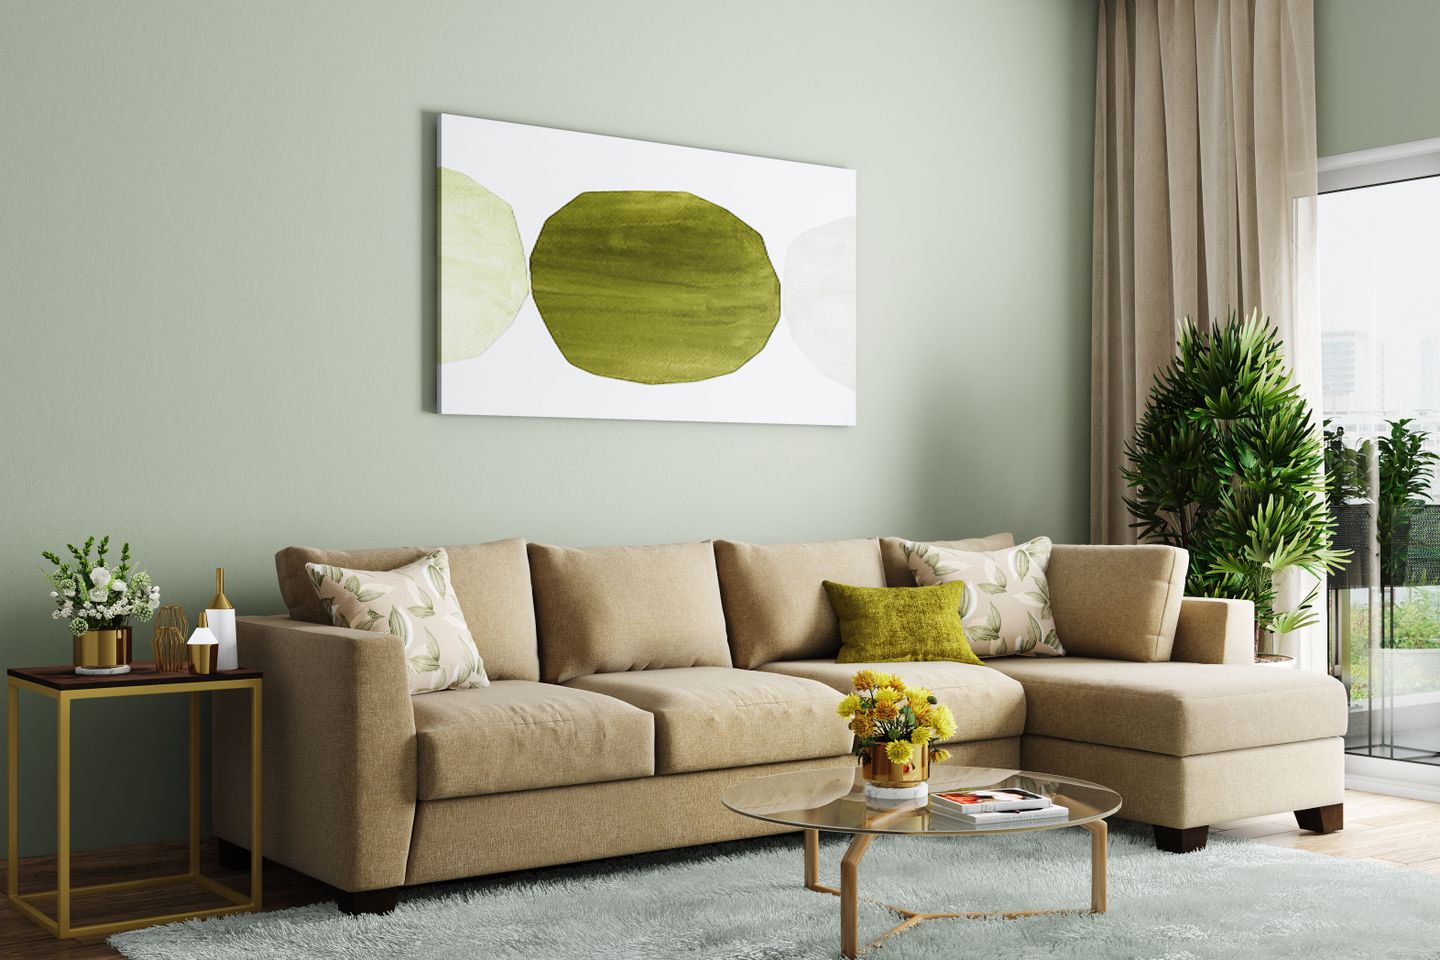 Light Green Living Room Wall Paint Design With Tan Sofas | Livspace